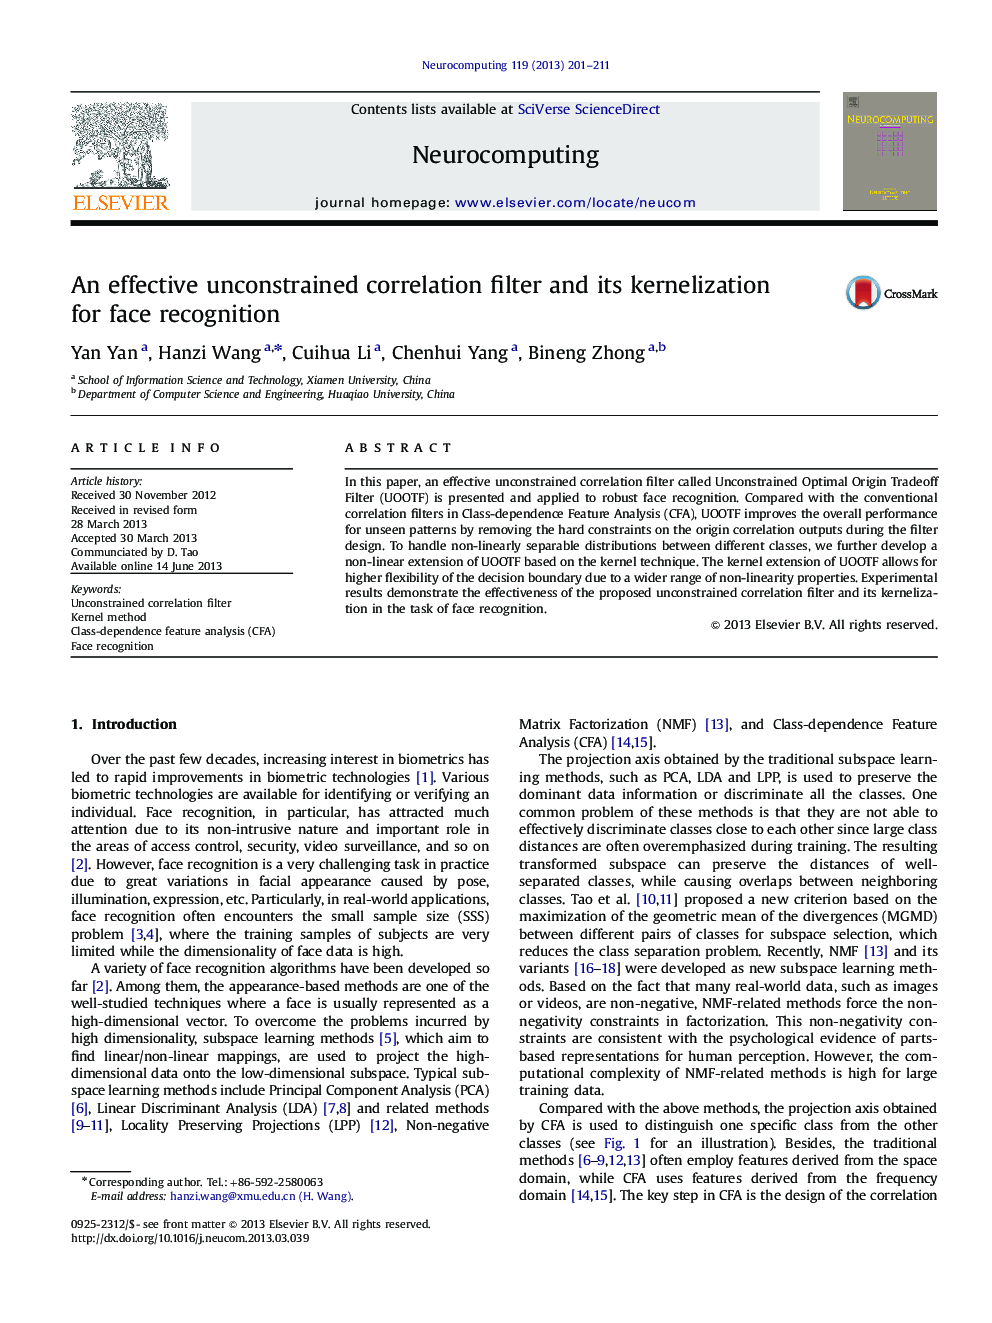 An effective unconstrained correlation filter and its kernelization for face recognition